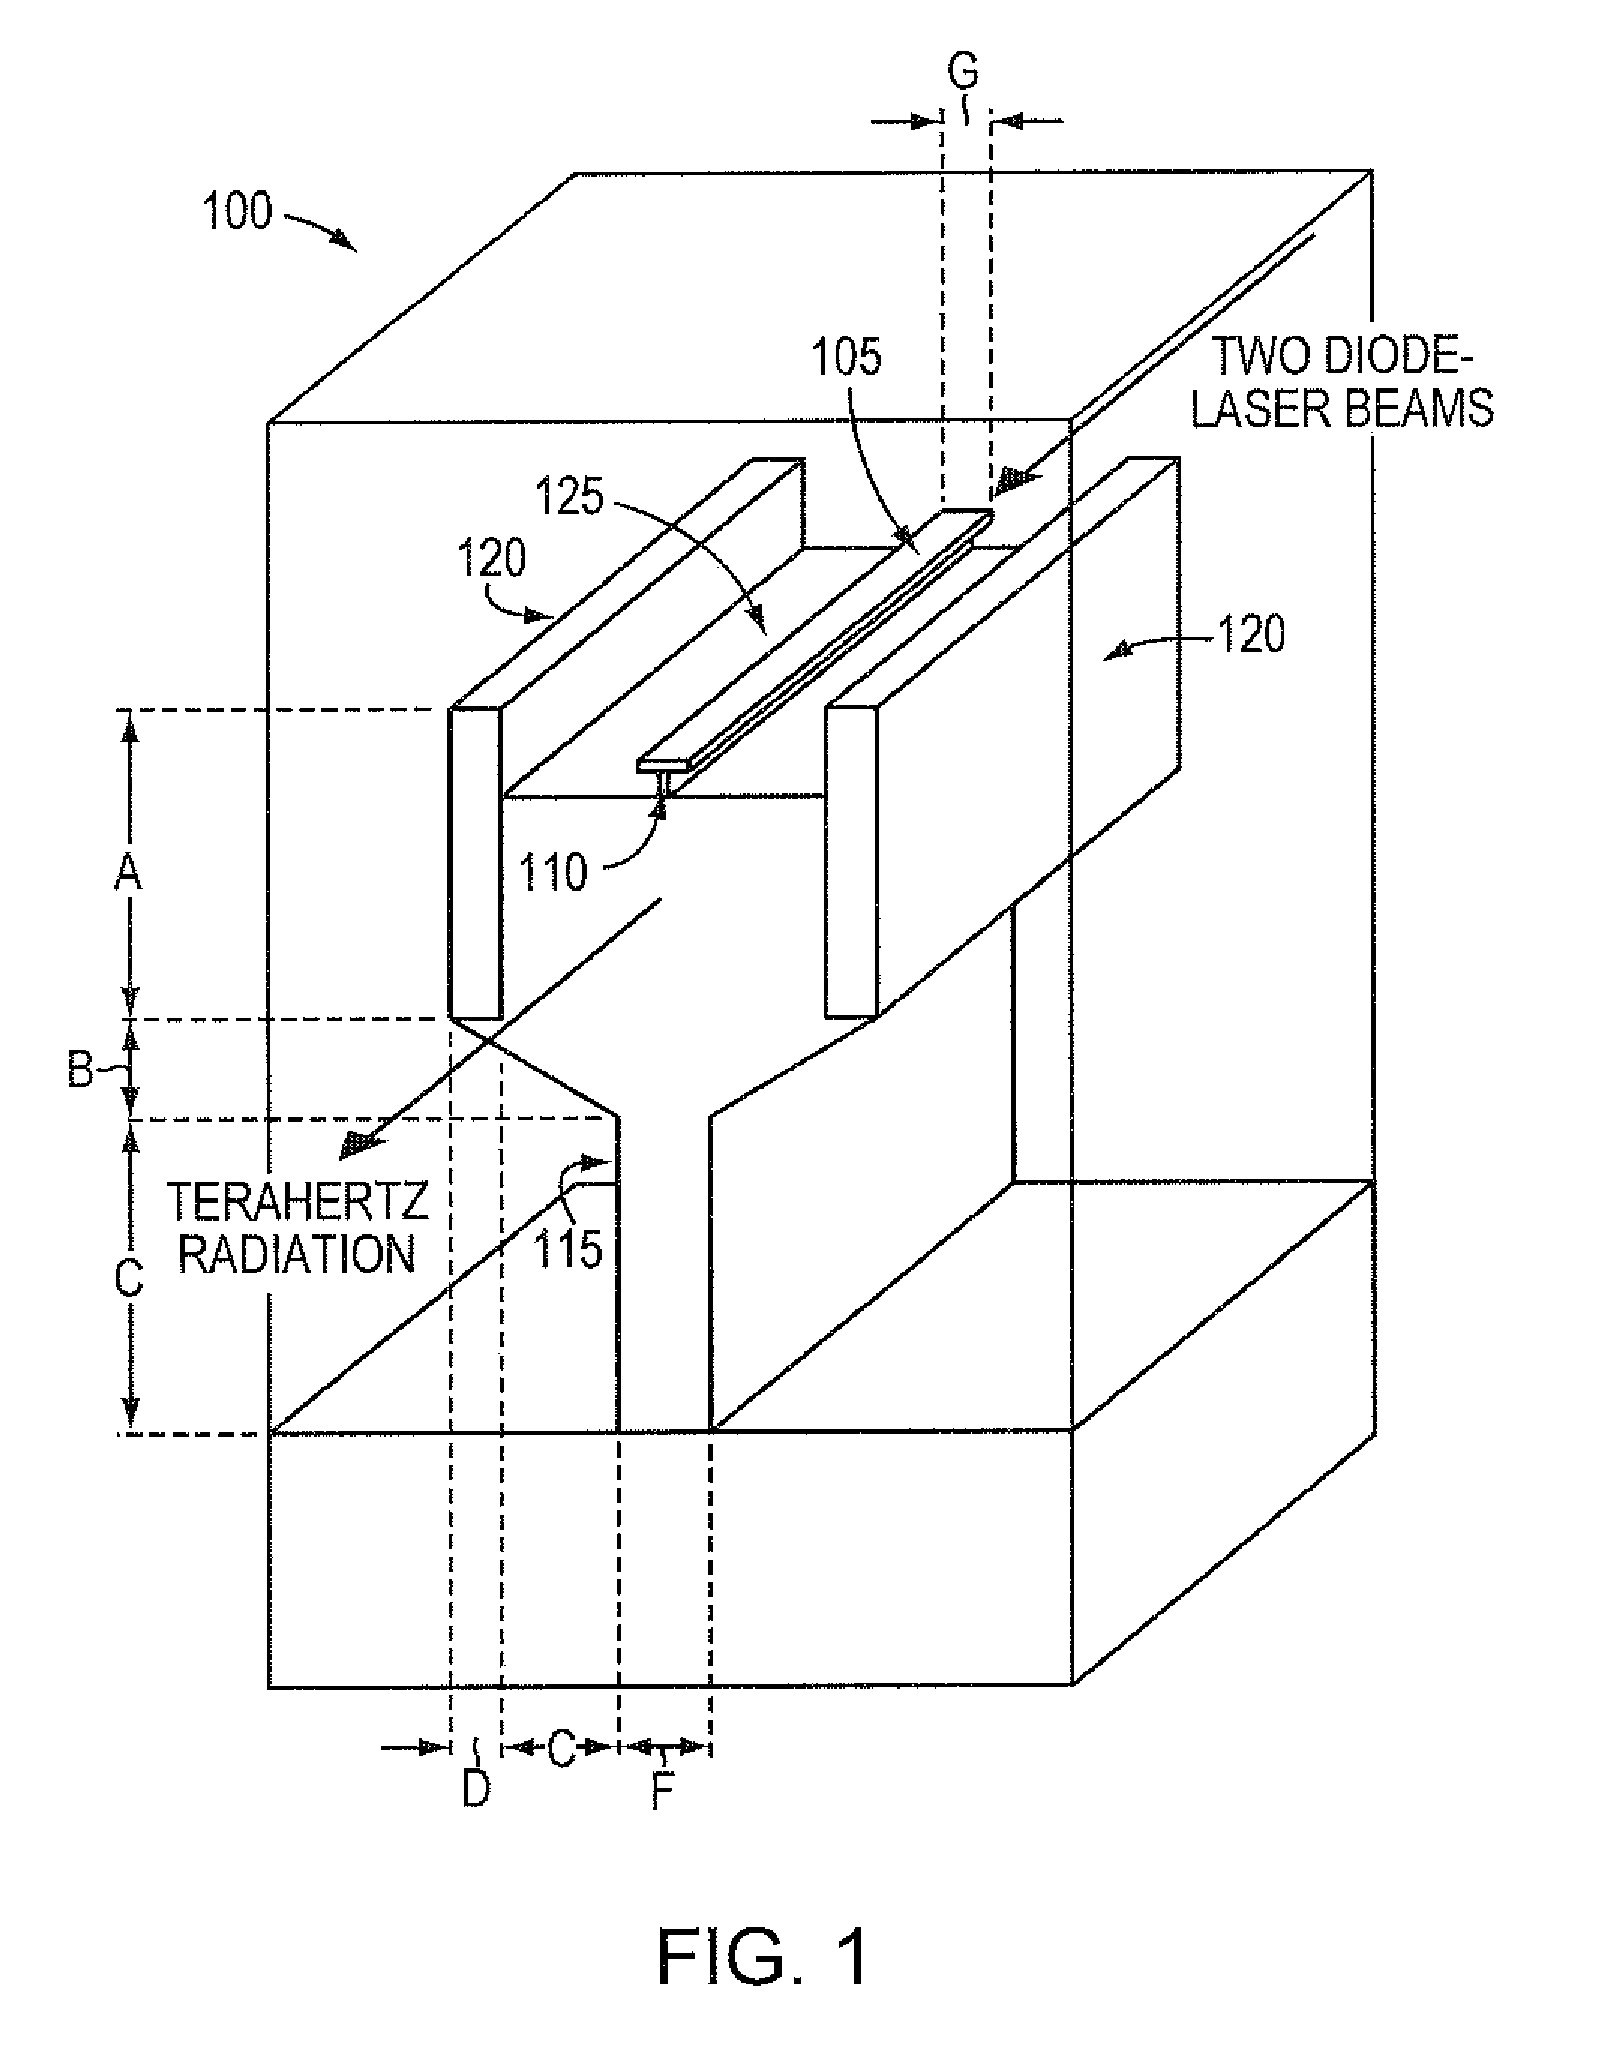 Low loss terahertz waveguides, and terahertz generation with nonlinear optical systems